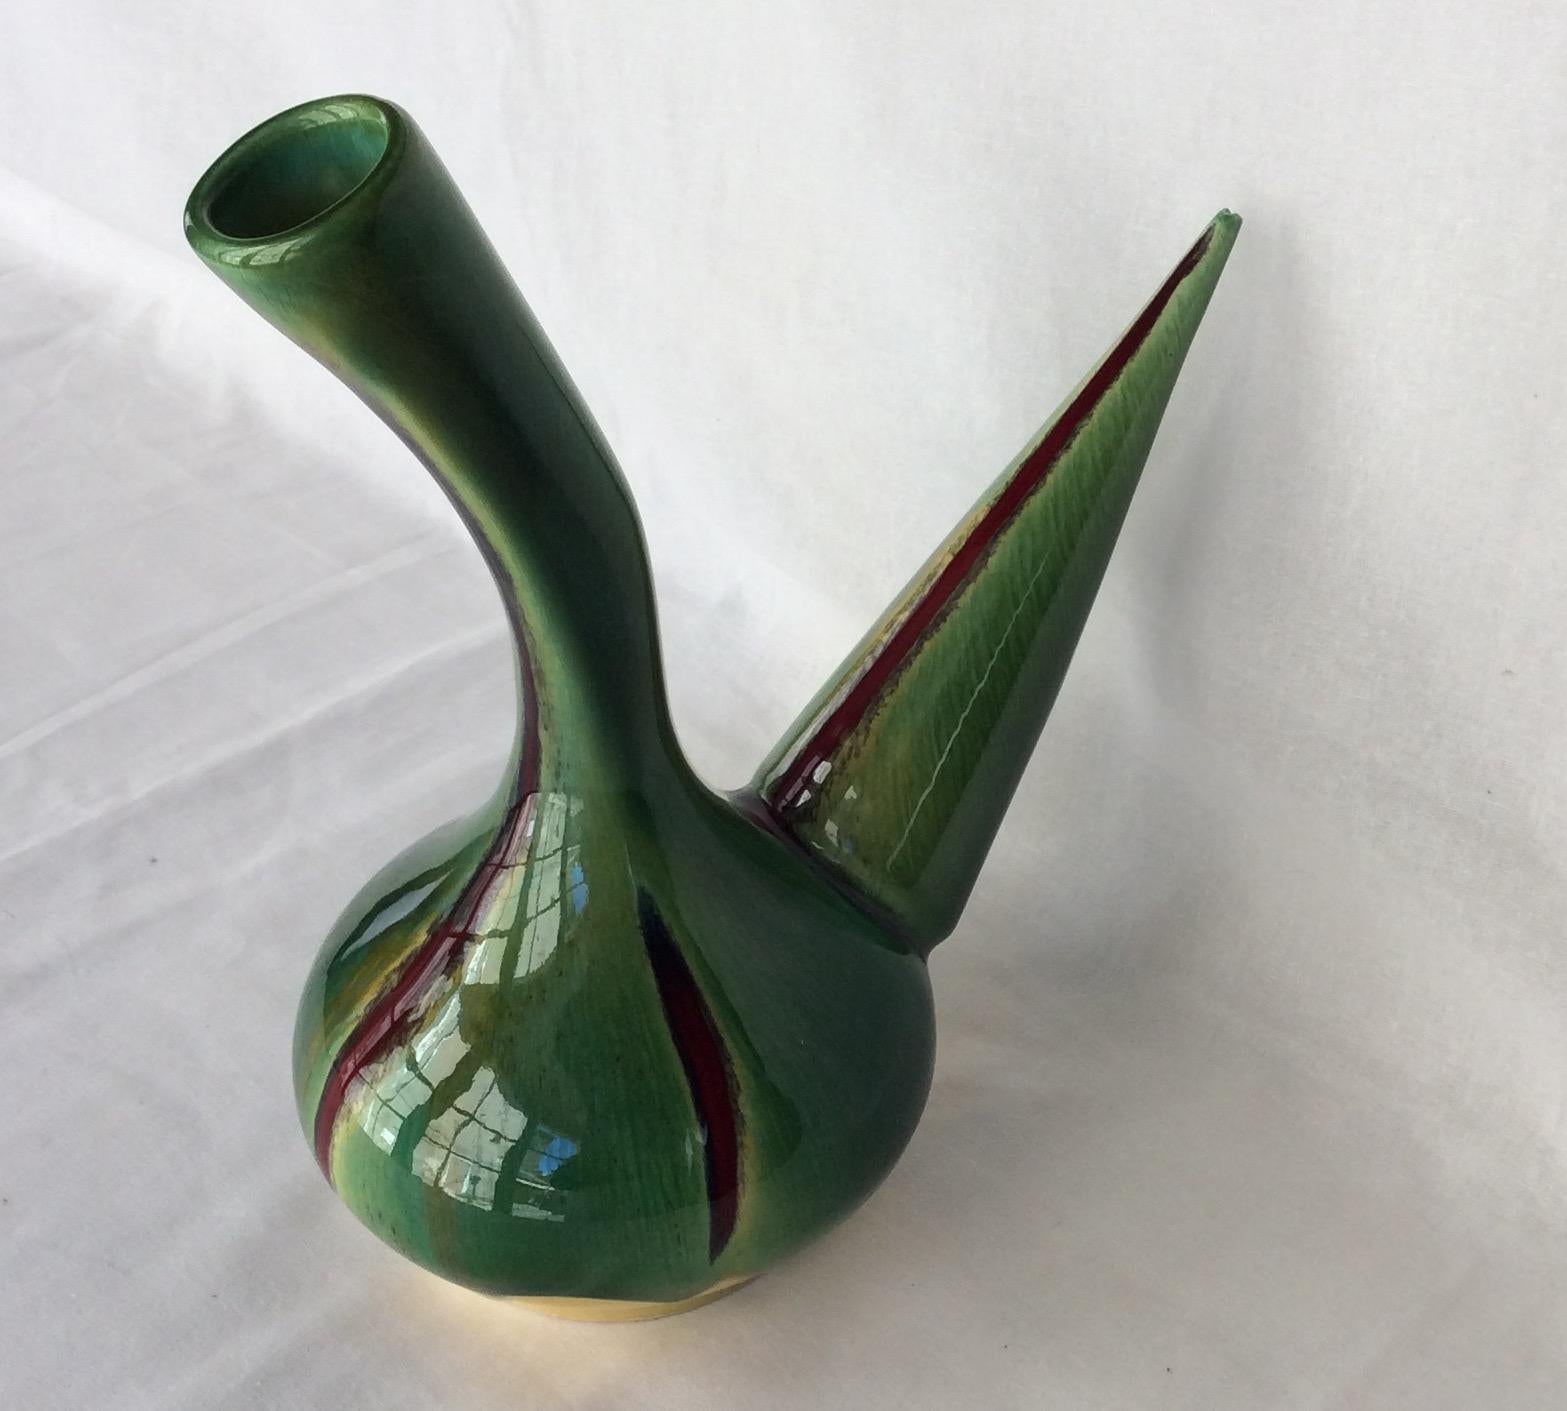 Stunning midcentury decorative vessel resembling centuries old Greek or Roman oil jars. This interesting designed piece is from Perpignan, France. 

The brilliant green, yellow, ruby red and black glazed ceramic is very pleasing to the